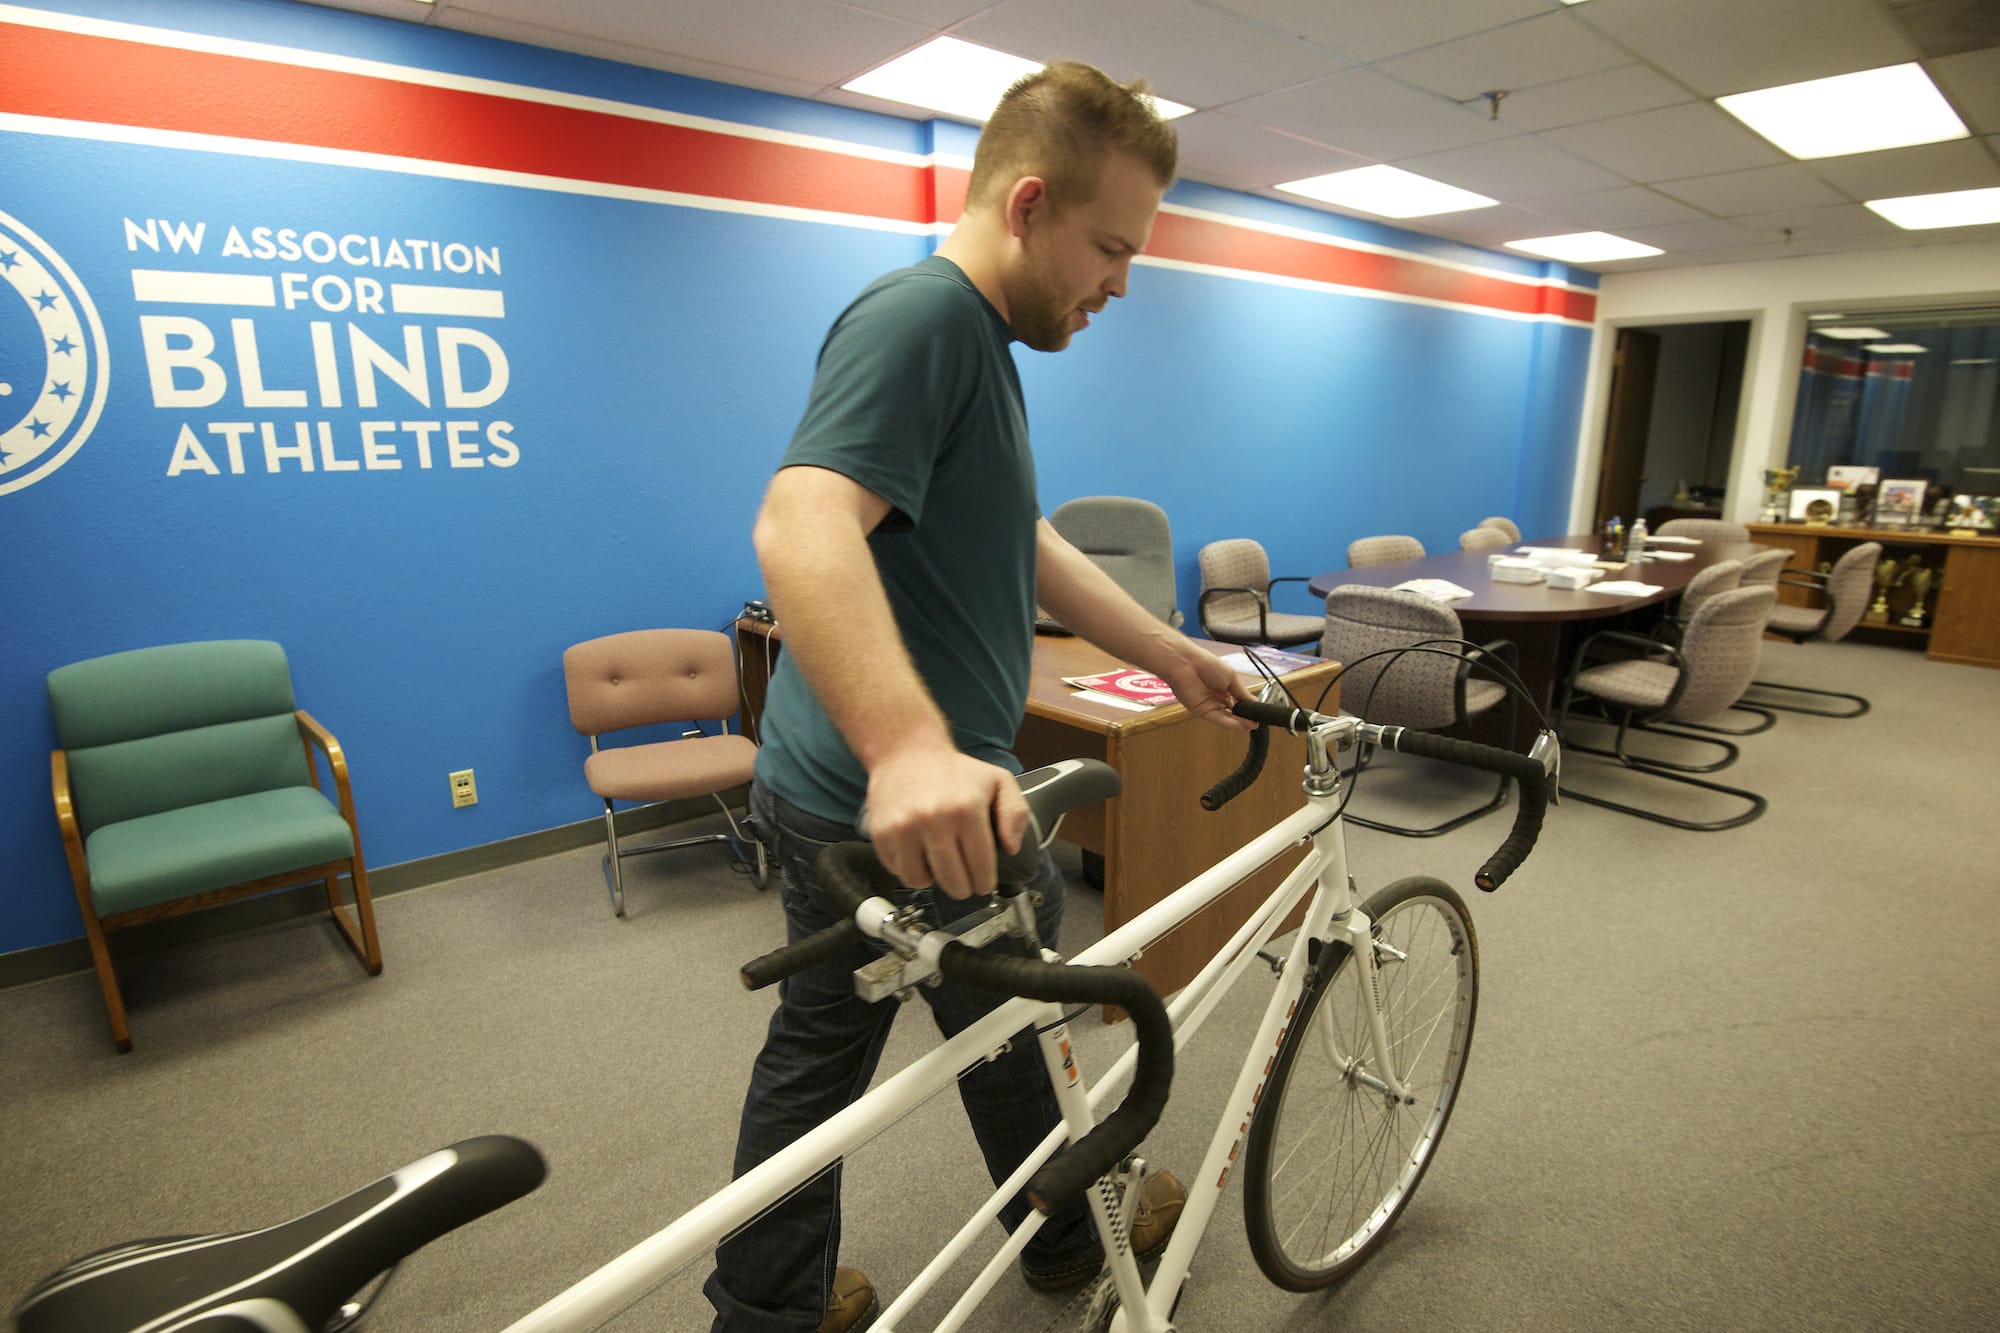 Columbian files
Billy Henry, executive director of the Northwest Association for Blind Athletes, expects to store more sports equipment to lend out in a new, grant-backed larger office.Henry rolls a donated tandem bike into his agency's office in this file photo from 2013. A new $150,000 grant will help the agency move to a larger office, afford more sports equipment like tandem bikes, and hire a program manager.